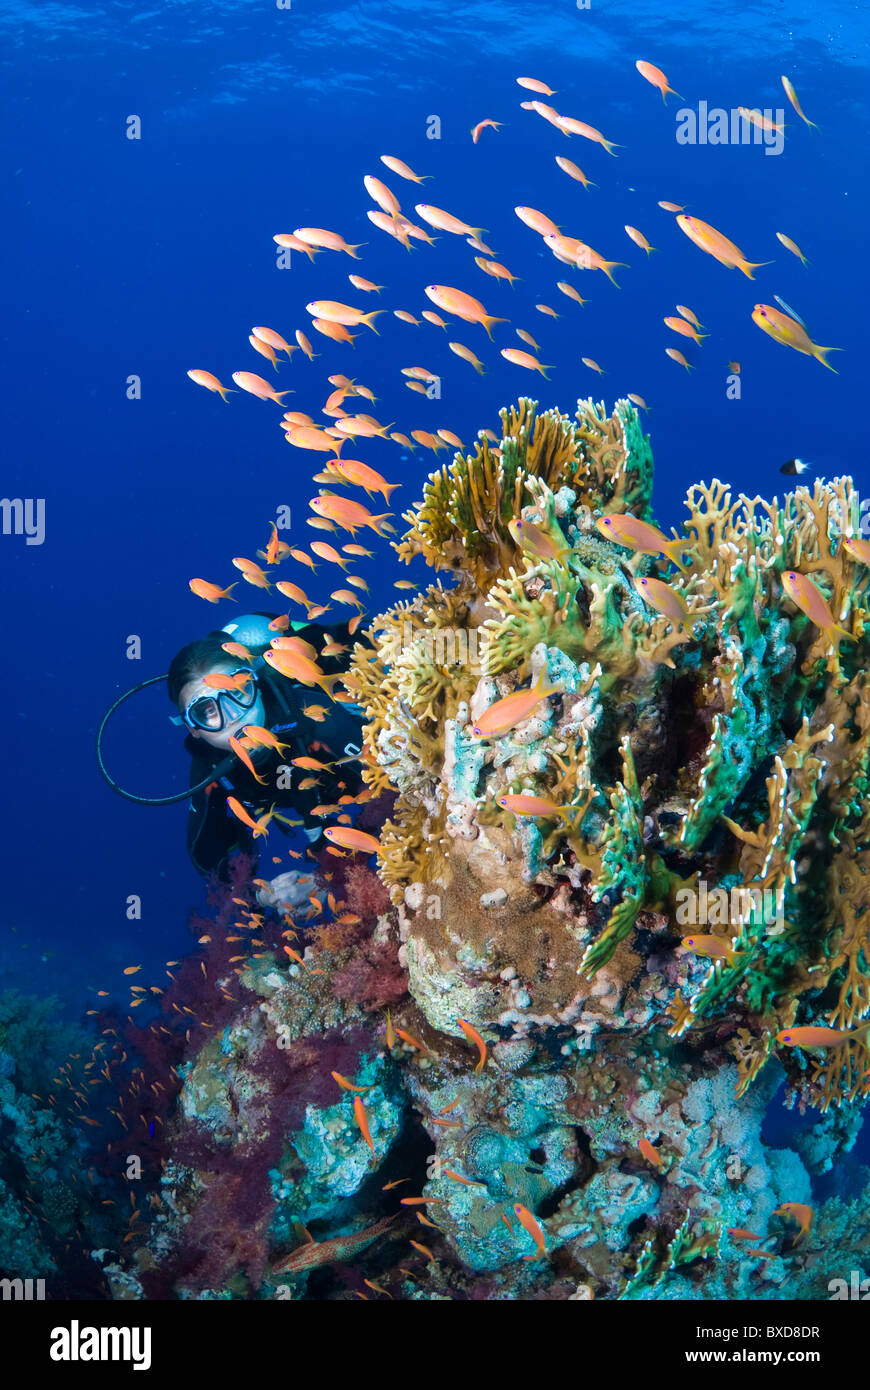 Scuba diver observing schooling anthias around fire coral patch, Ras Zatar, Ras Mohammed national park, Egypt, Red Sea Stock Photo